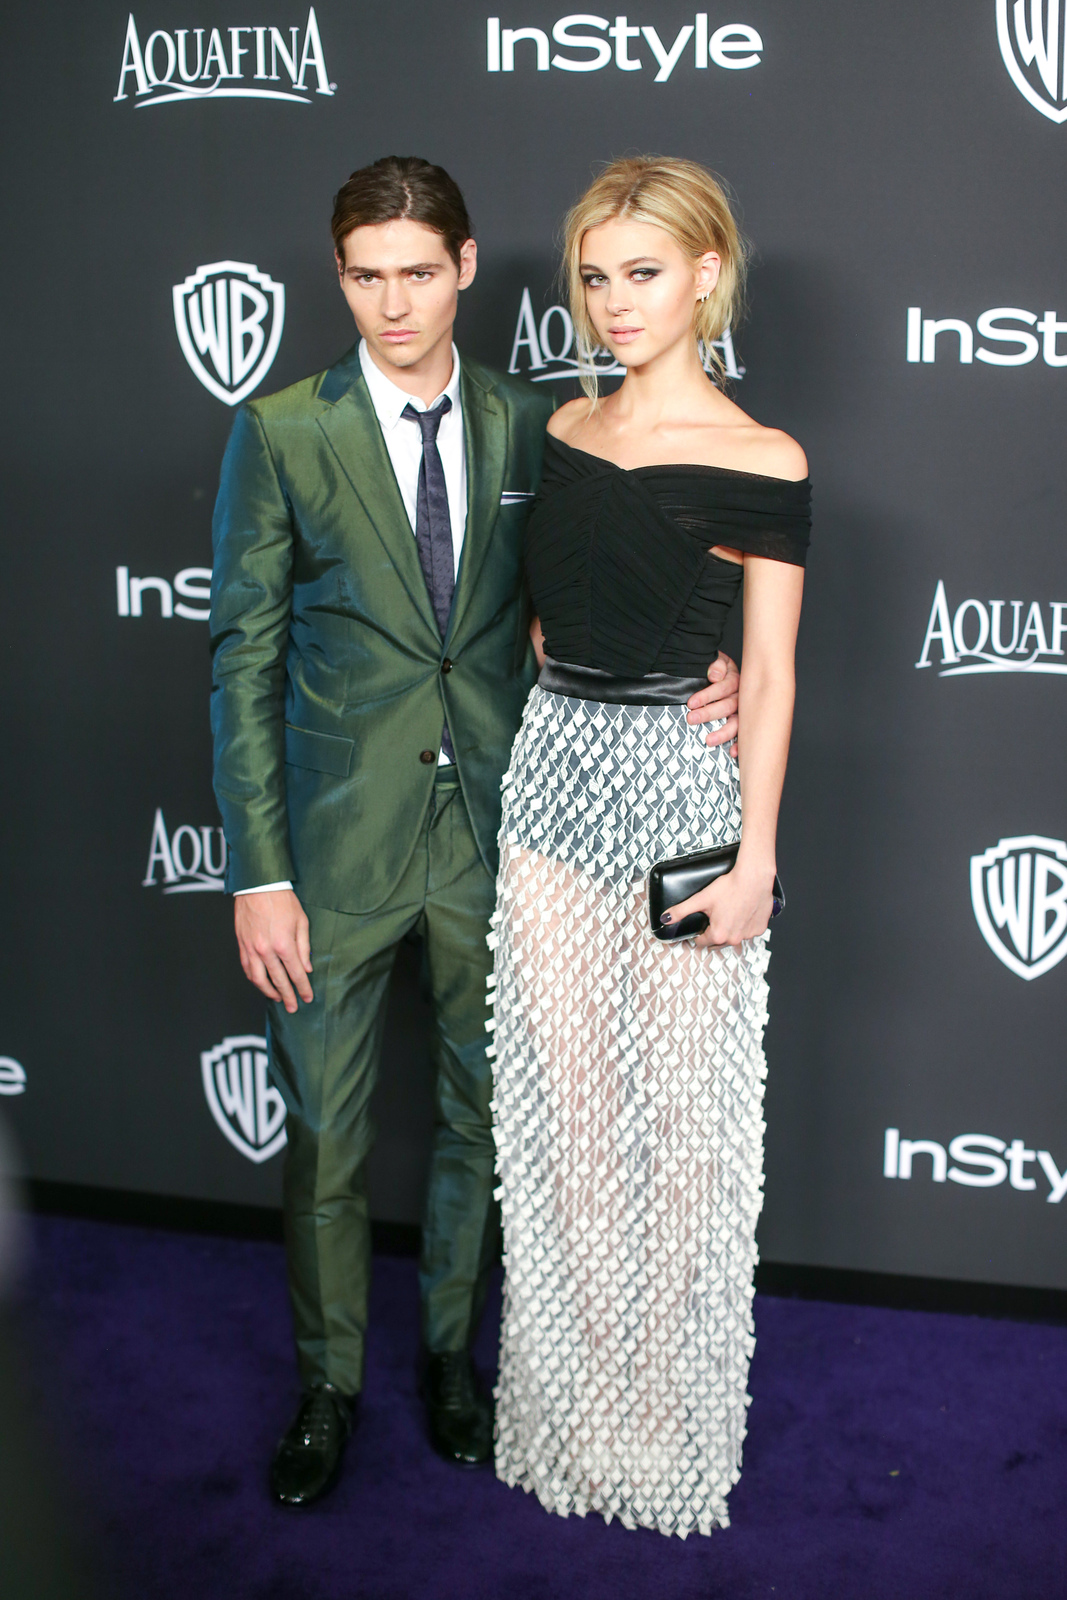 Will Peltz and Nicola Peltz attend the 2015 InStyle and Warner Bros. 72nd Annual Golden Globe Awards Post-Party at The Beverly Hilton Hotel on January 11, 2015 in Beverly Hills, California.